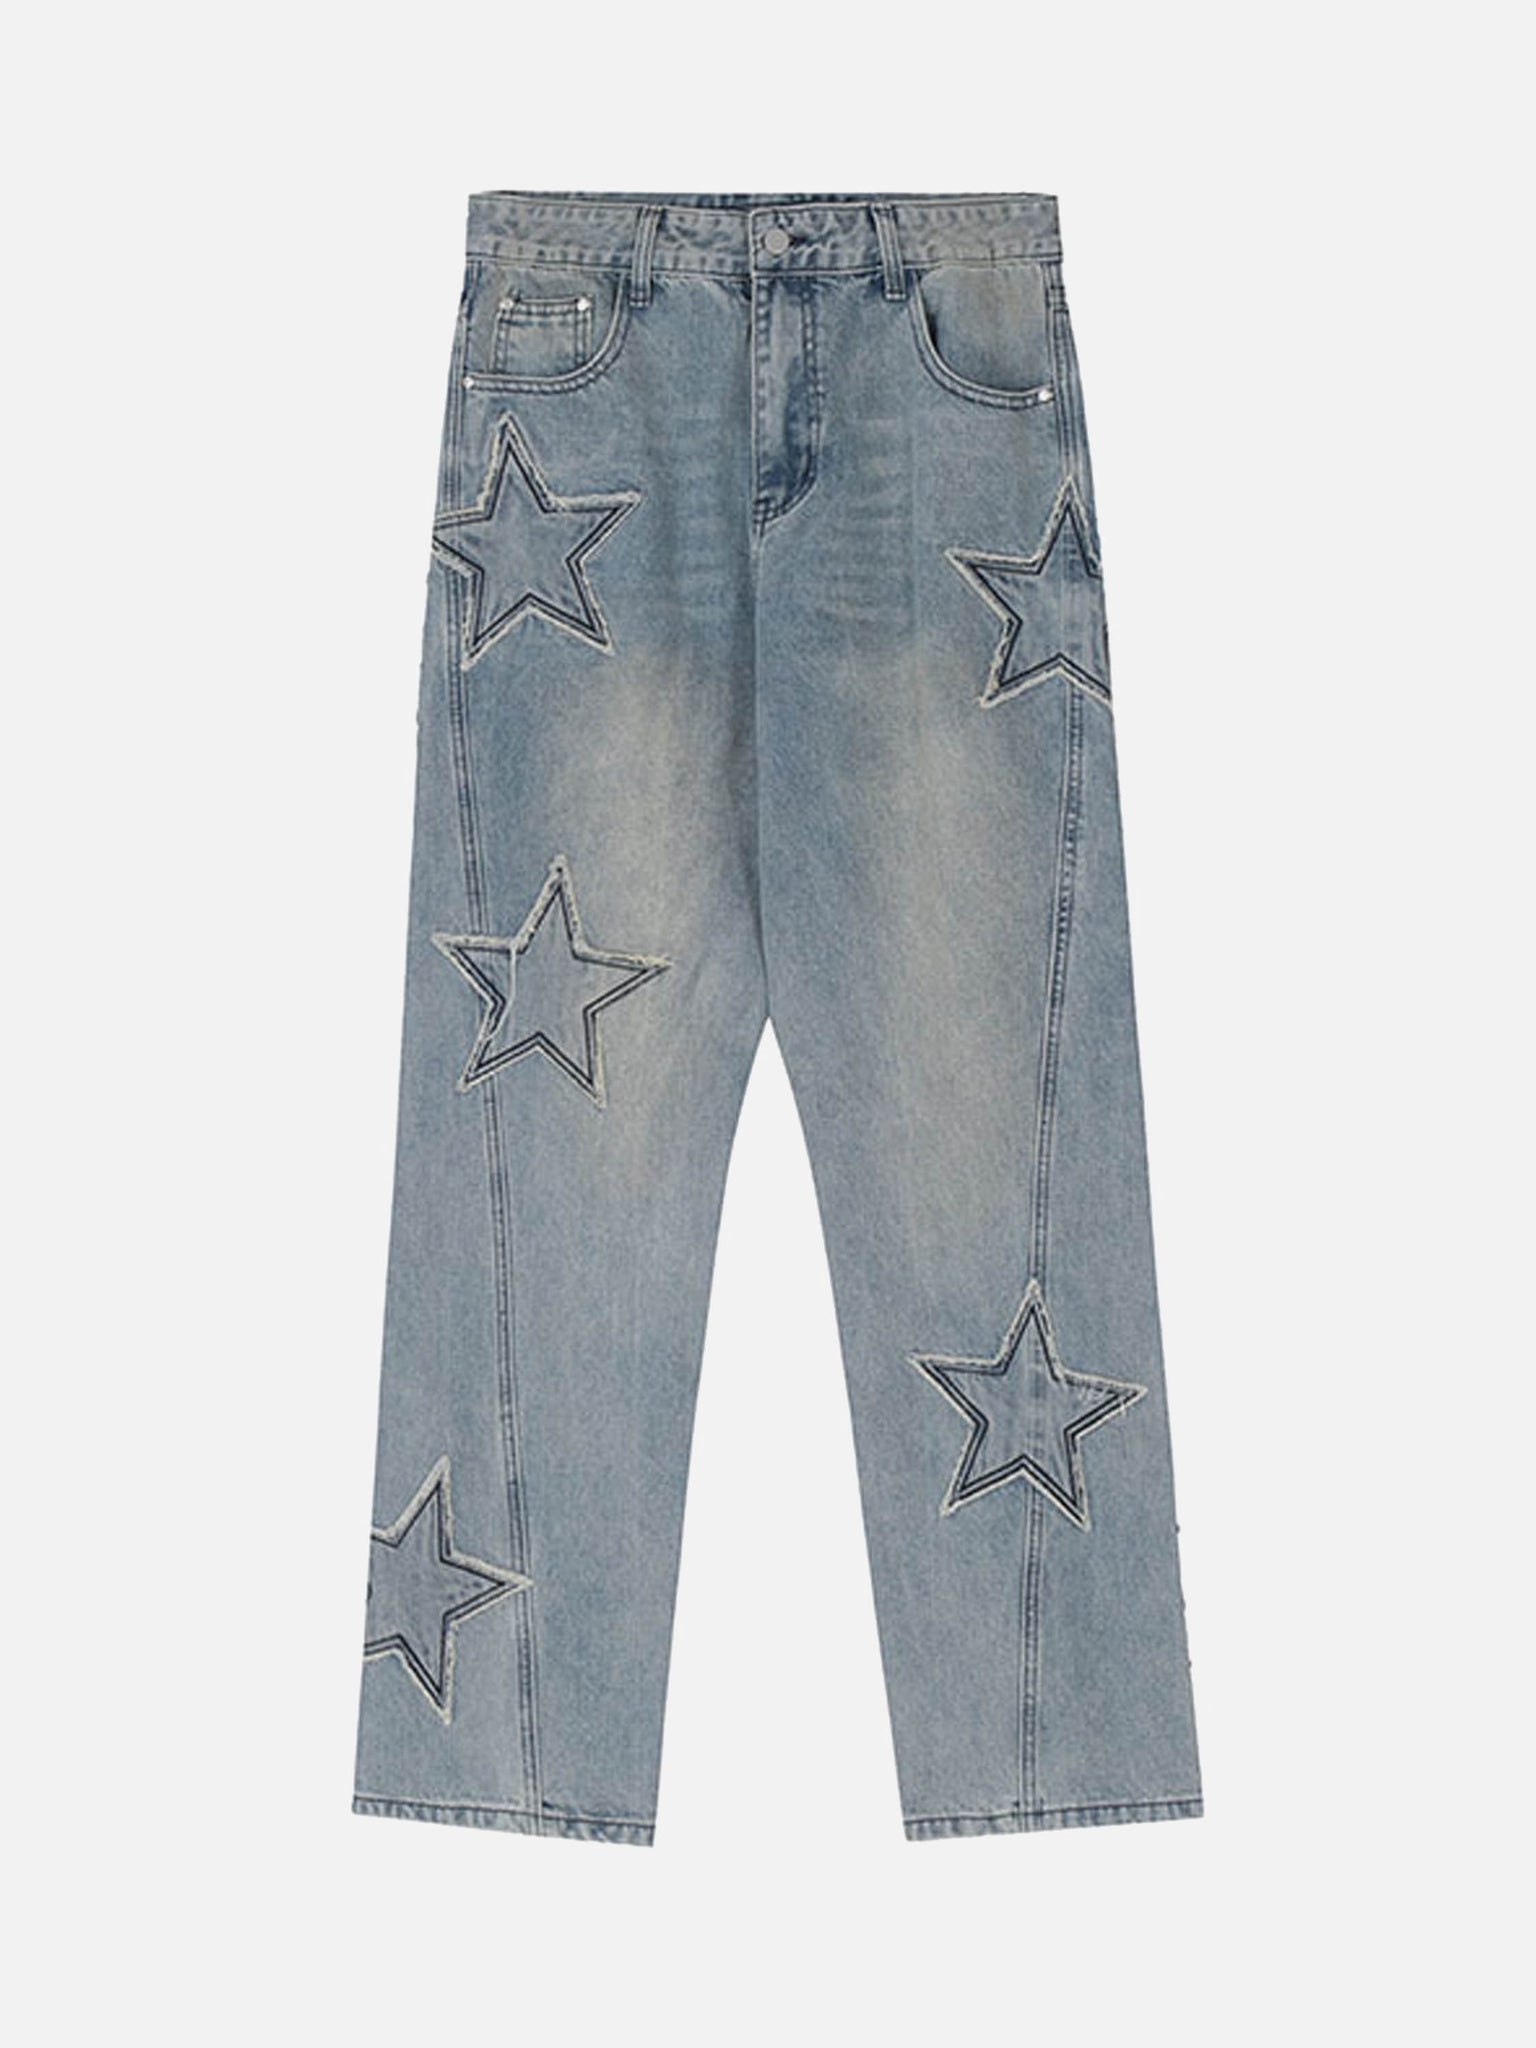 The Supermade American Vintage Star Patch Embroidered Jeans